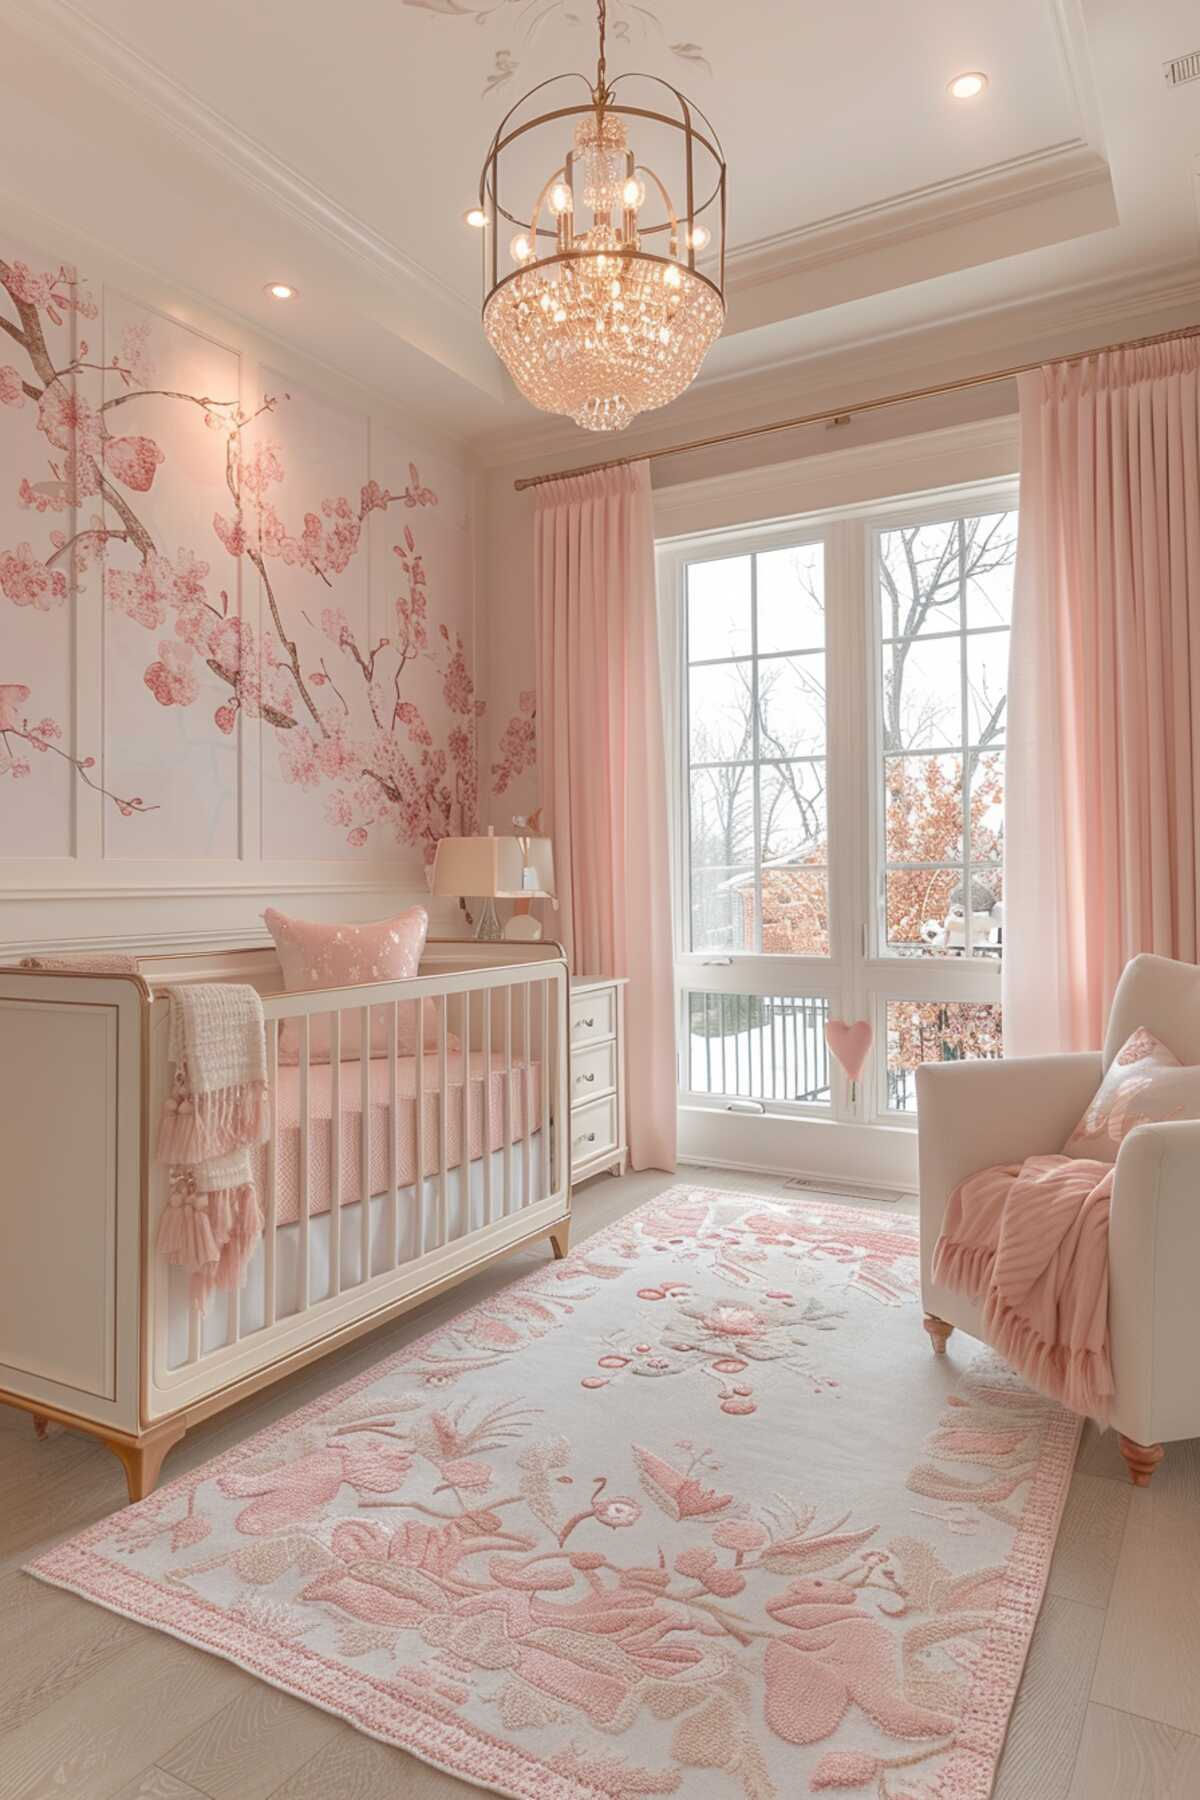 Adorable Nursery Themes for Baby Girls